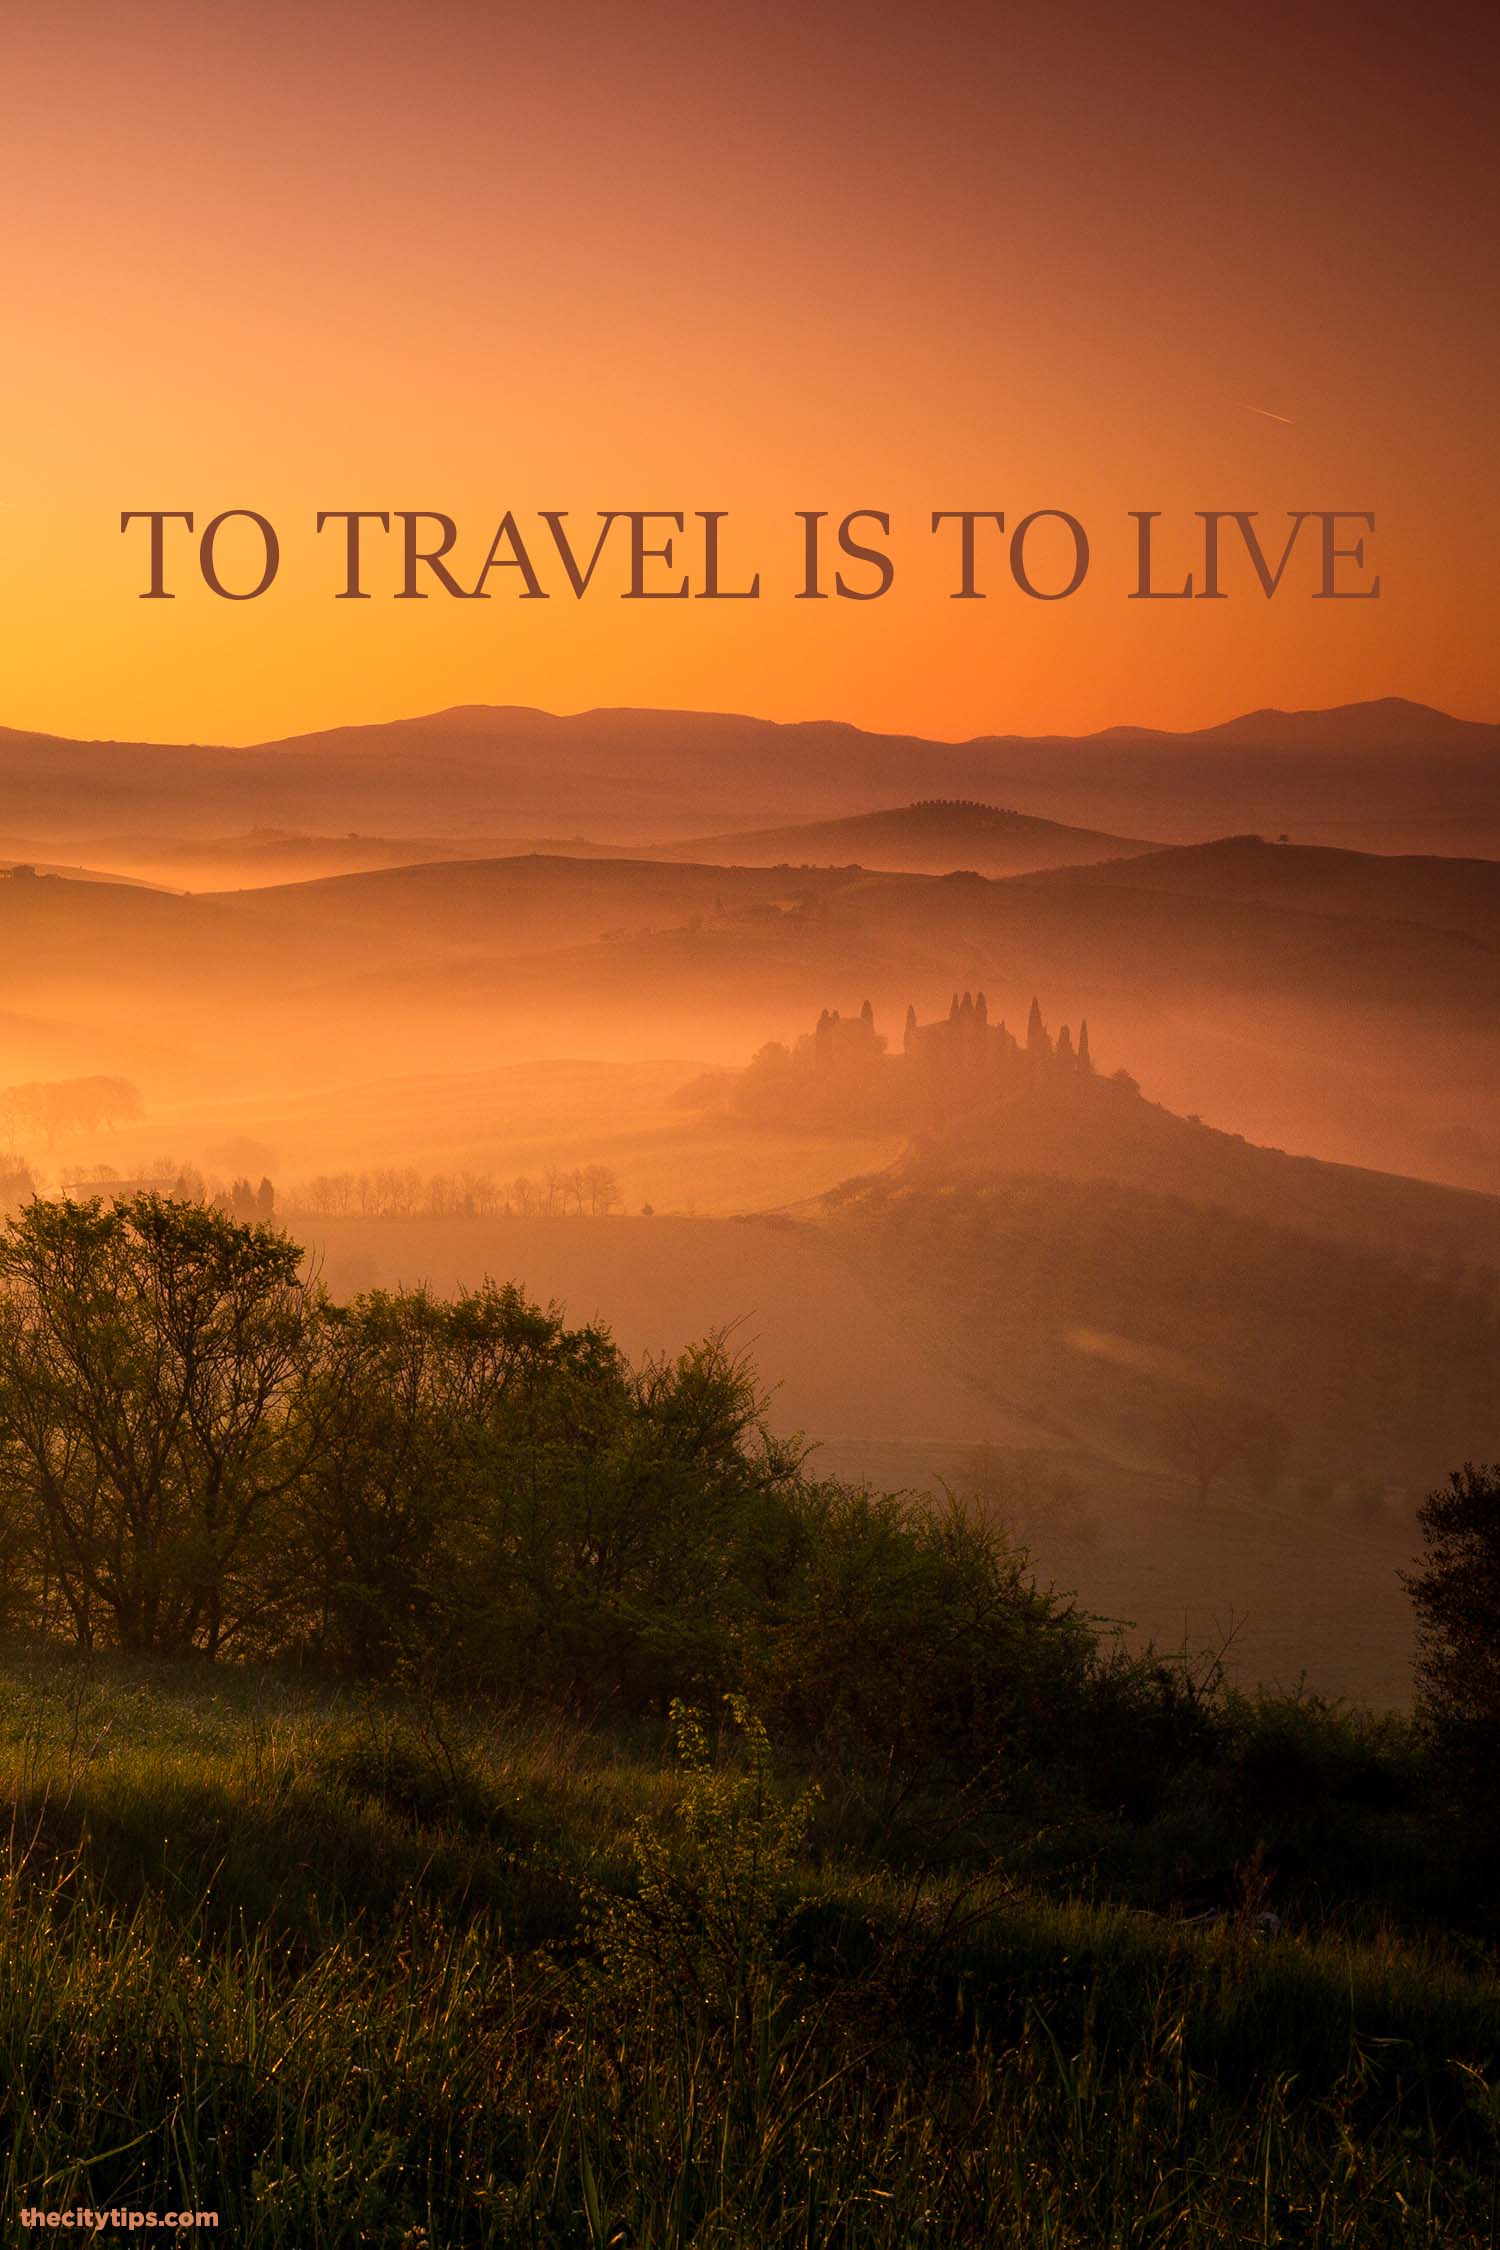 "To travel is to live." by Hans Christian Andersen